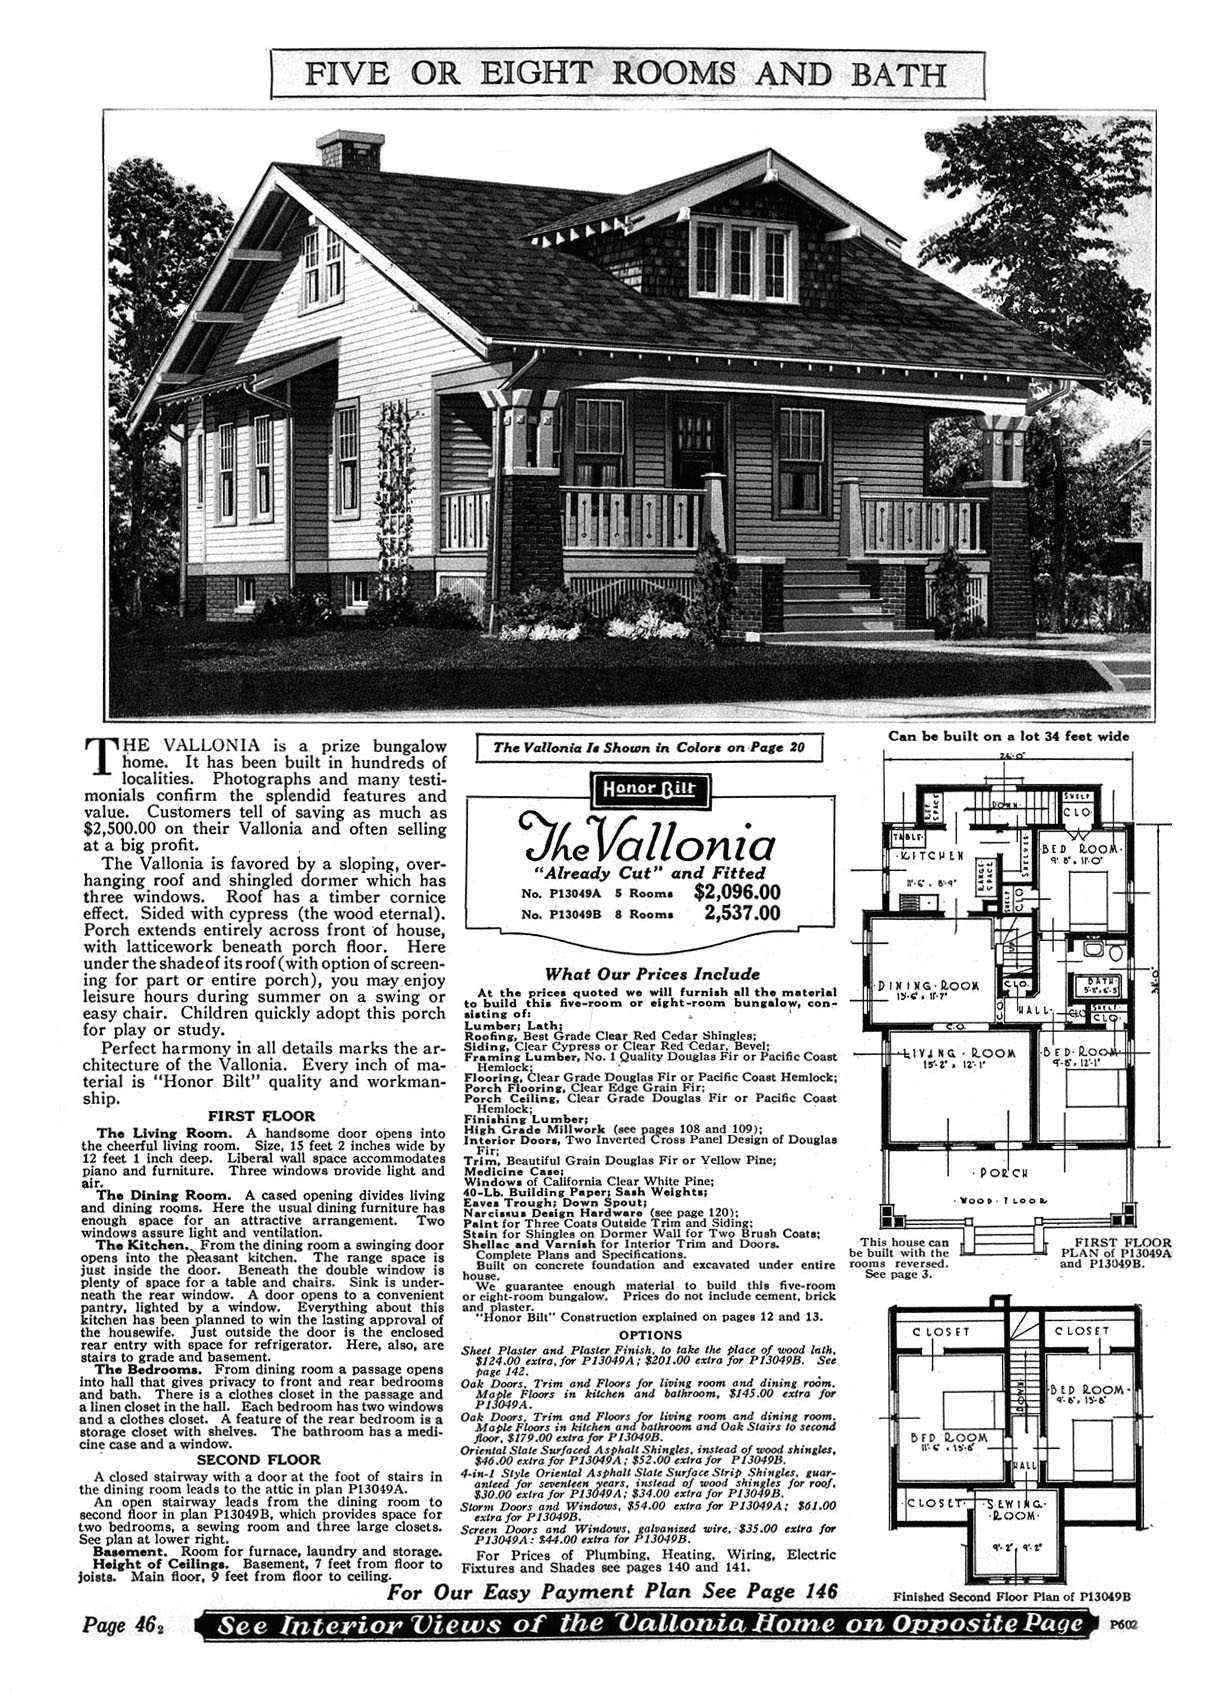 Sears Kit Homes Floor Plans the Sears and Roebuck Kit Home Real Estate